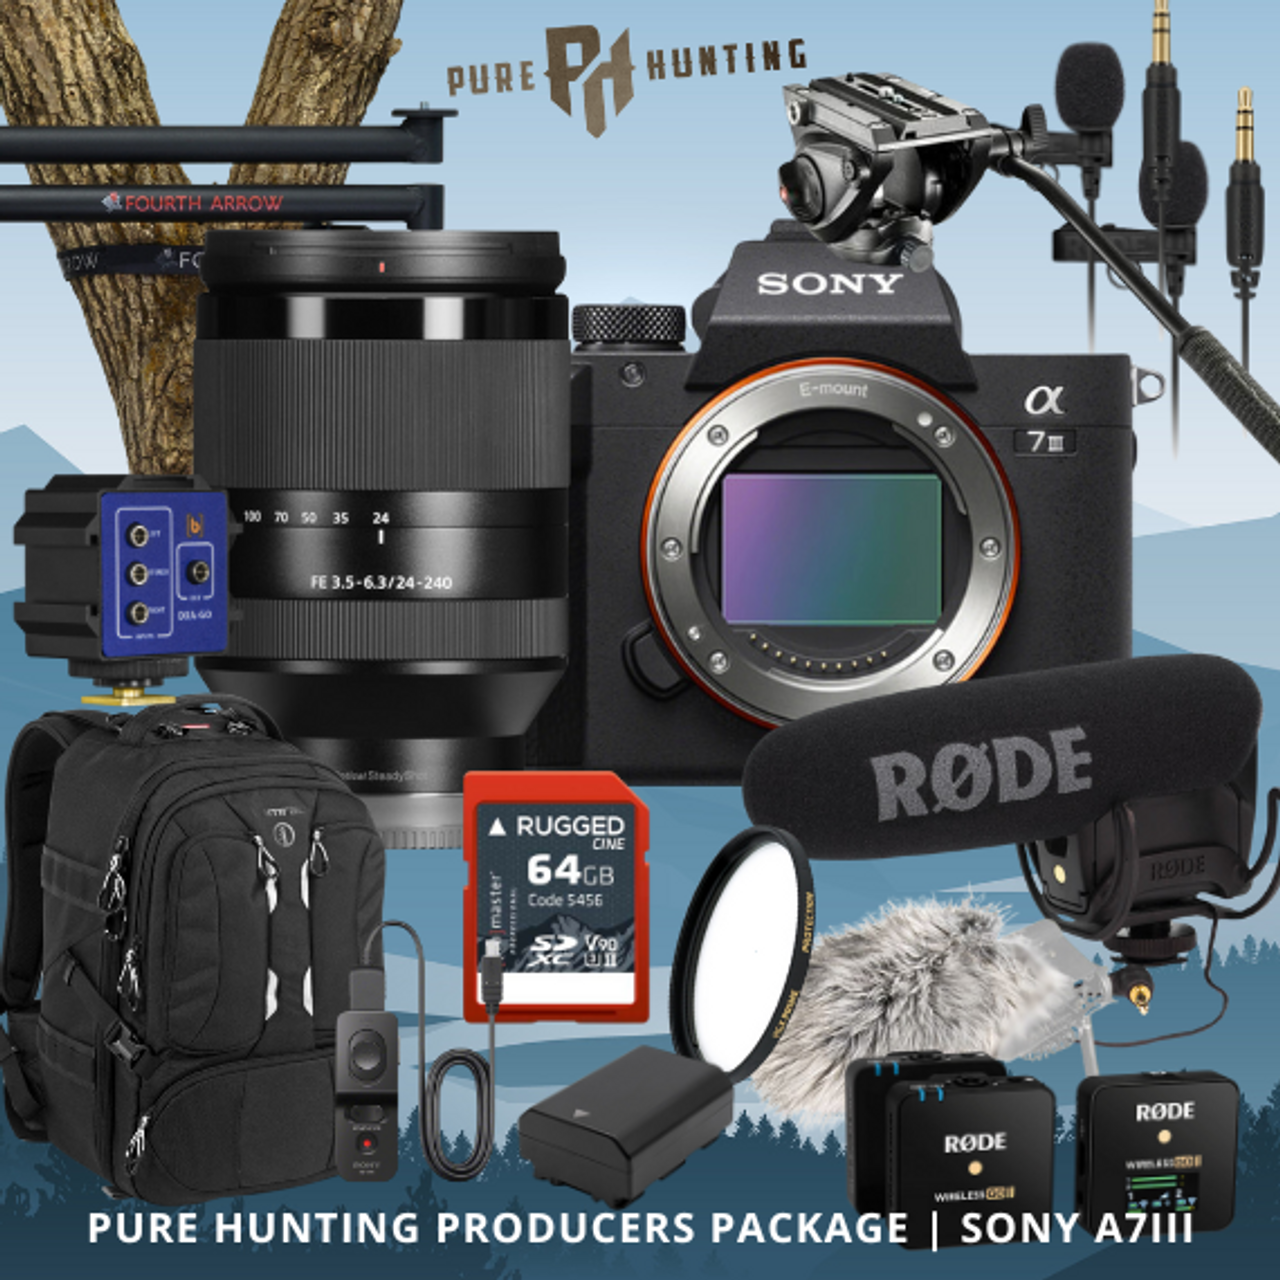 Pure Hunting Producers Package